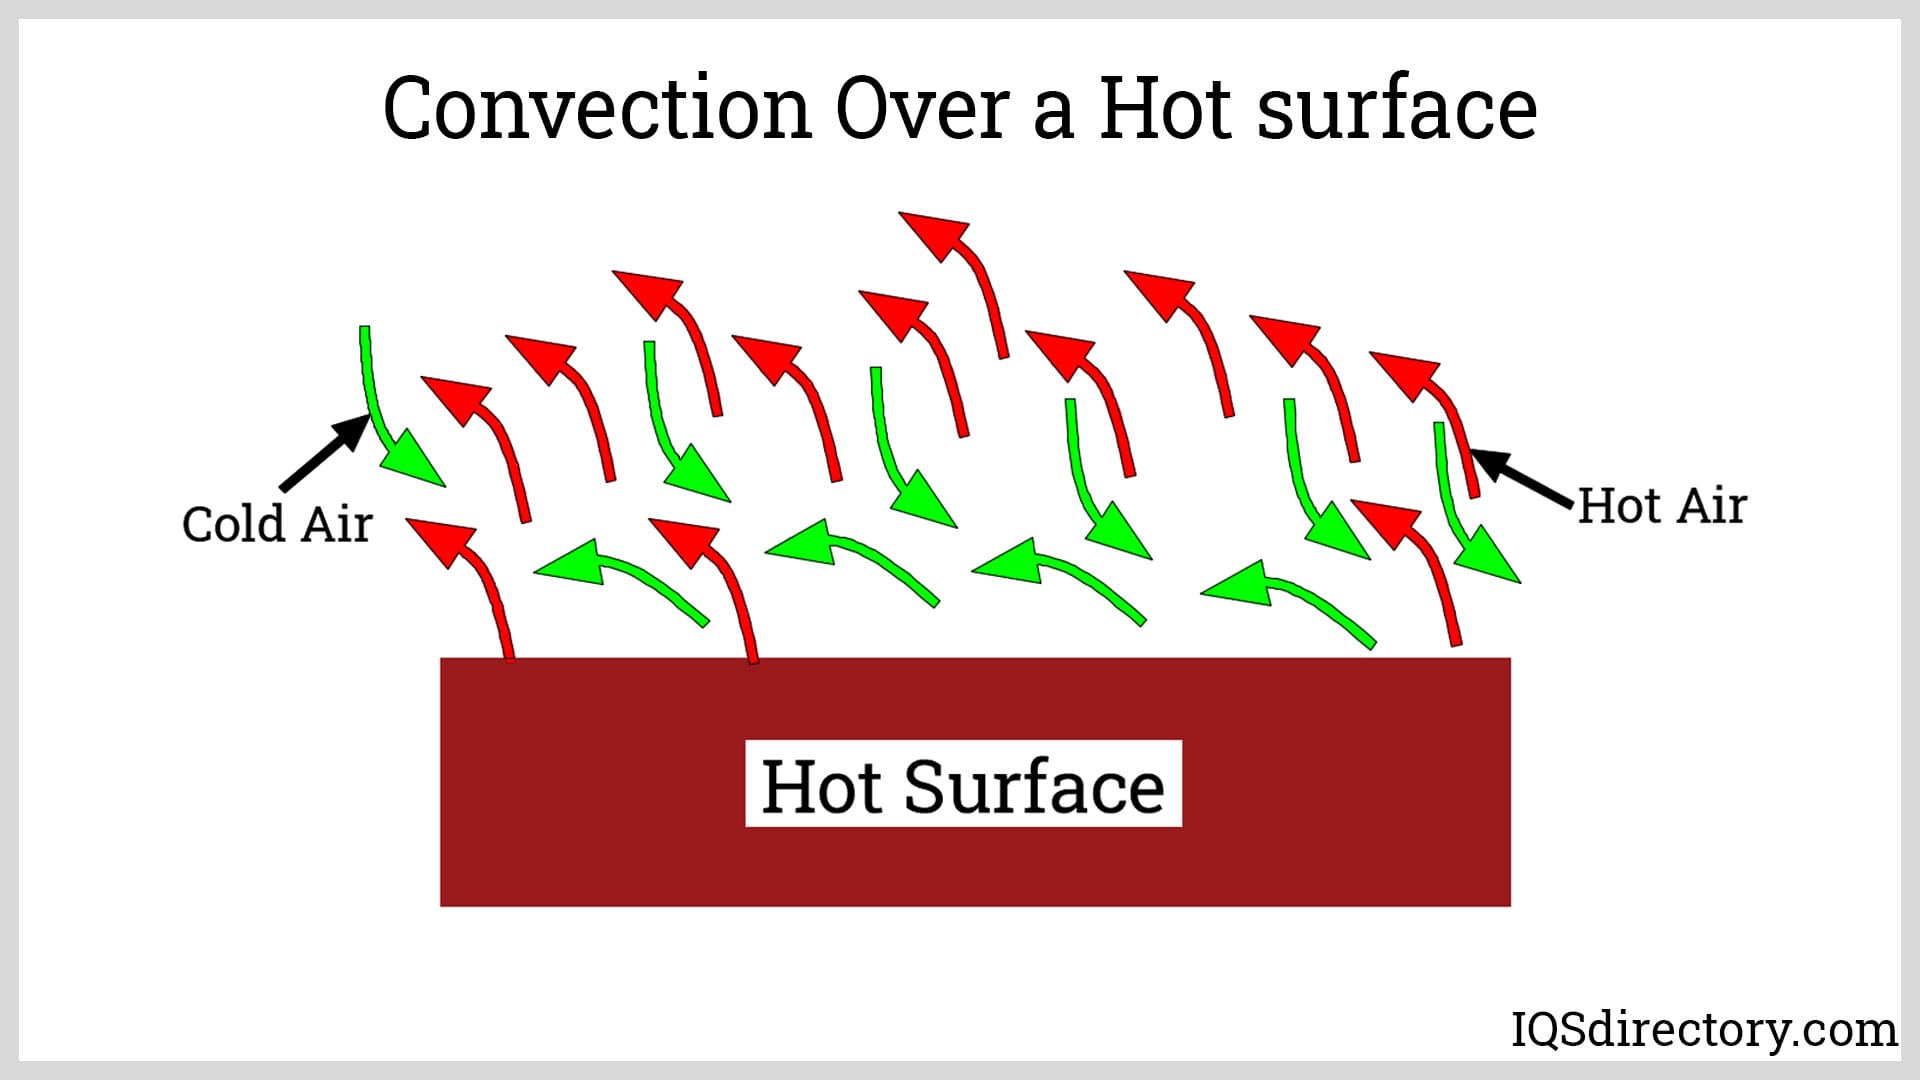 Convection Over a Hot surface